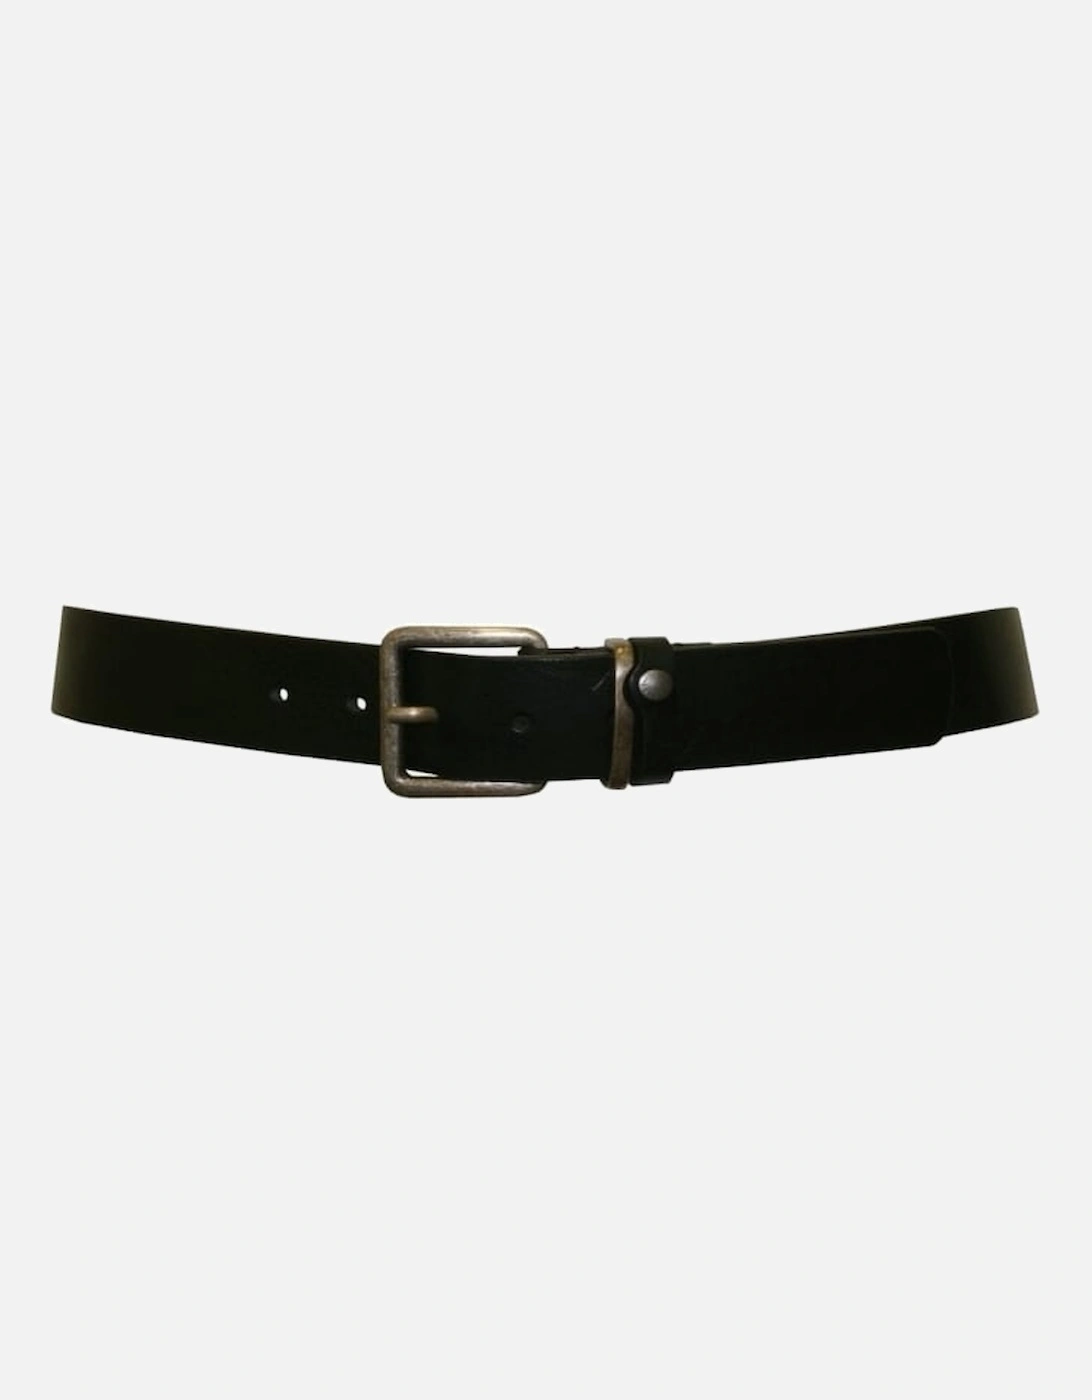 Katchup Casual Leather Jeans Belt, Black